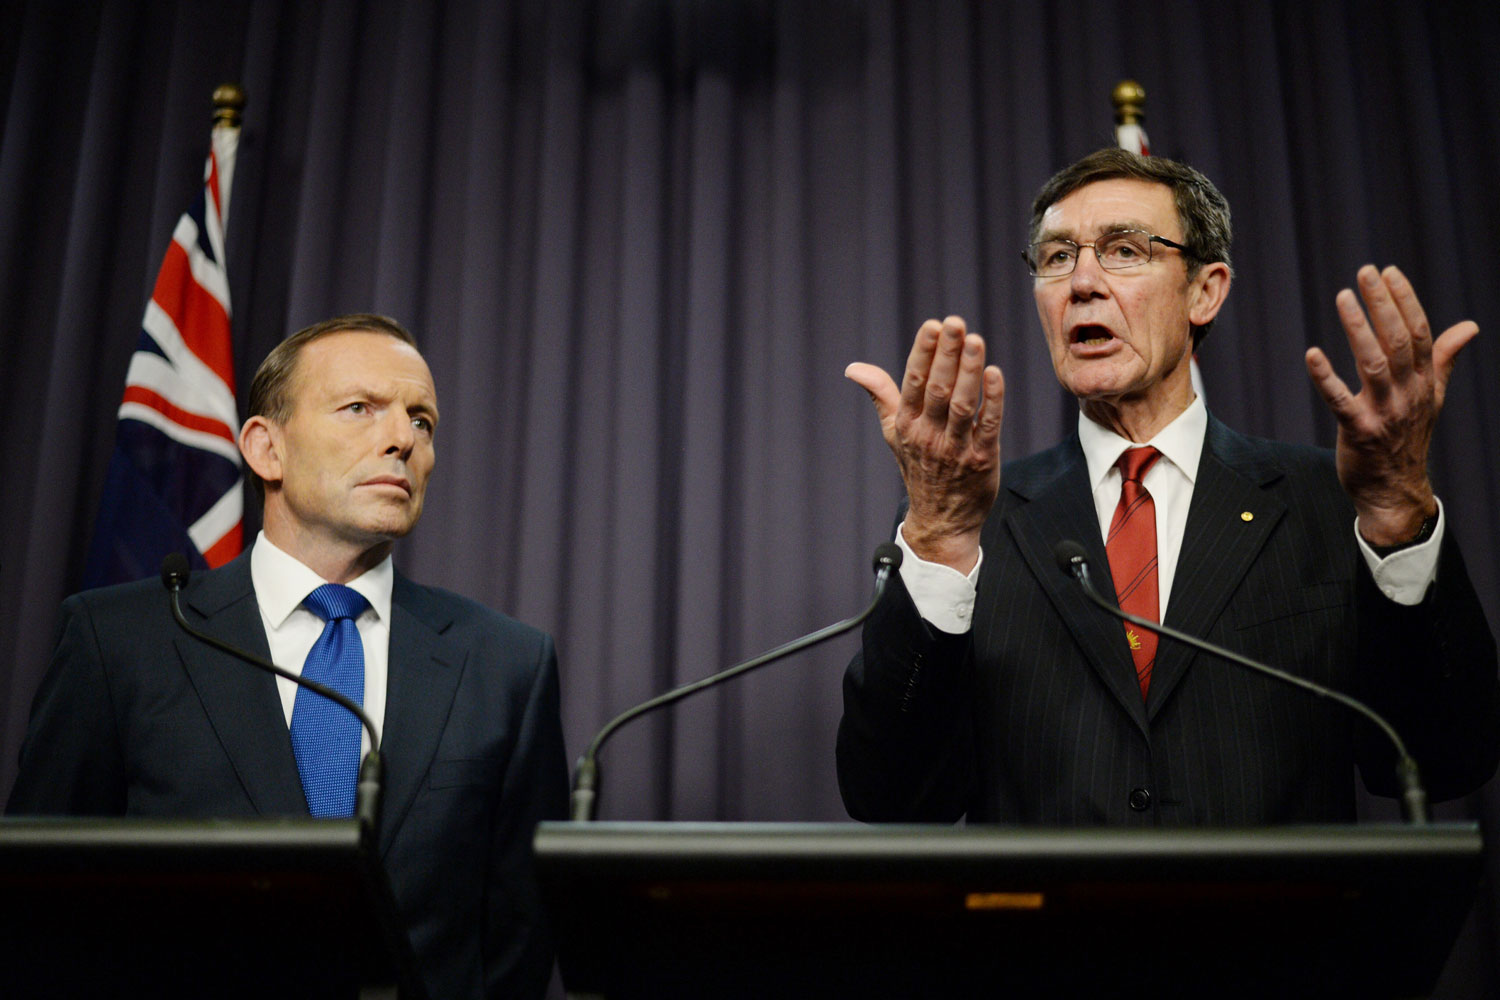 From left: Prime Minister Tony Abbott listens as Angus Houston, in charge of joint search efforts, speaks to the media during a press conference at Parliament House in Canberra on April 28, 2014.